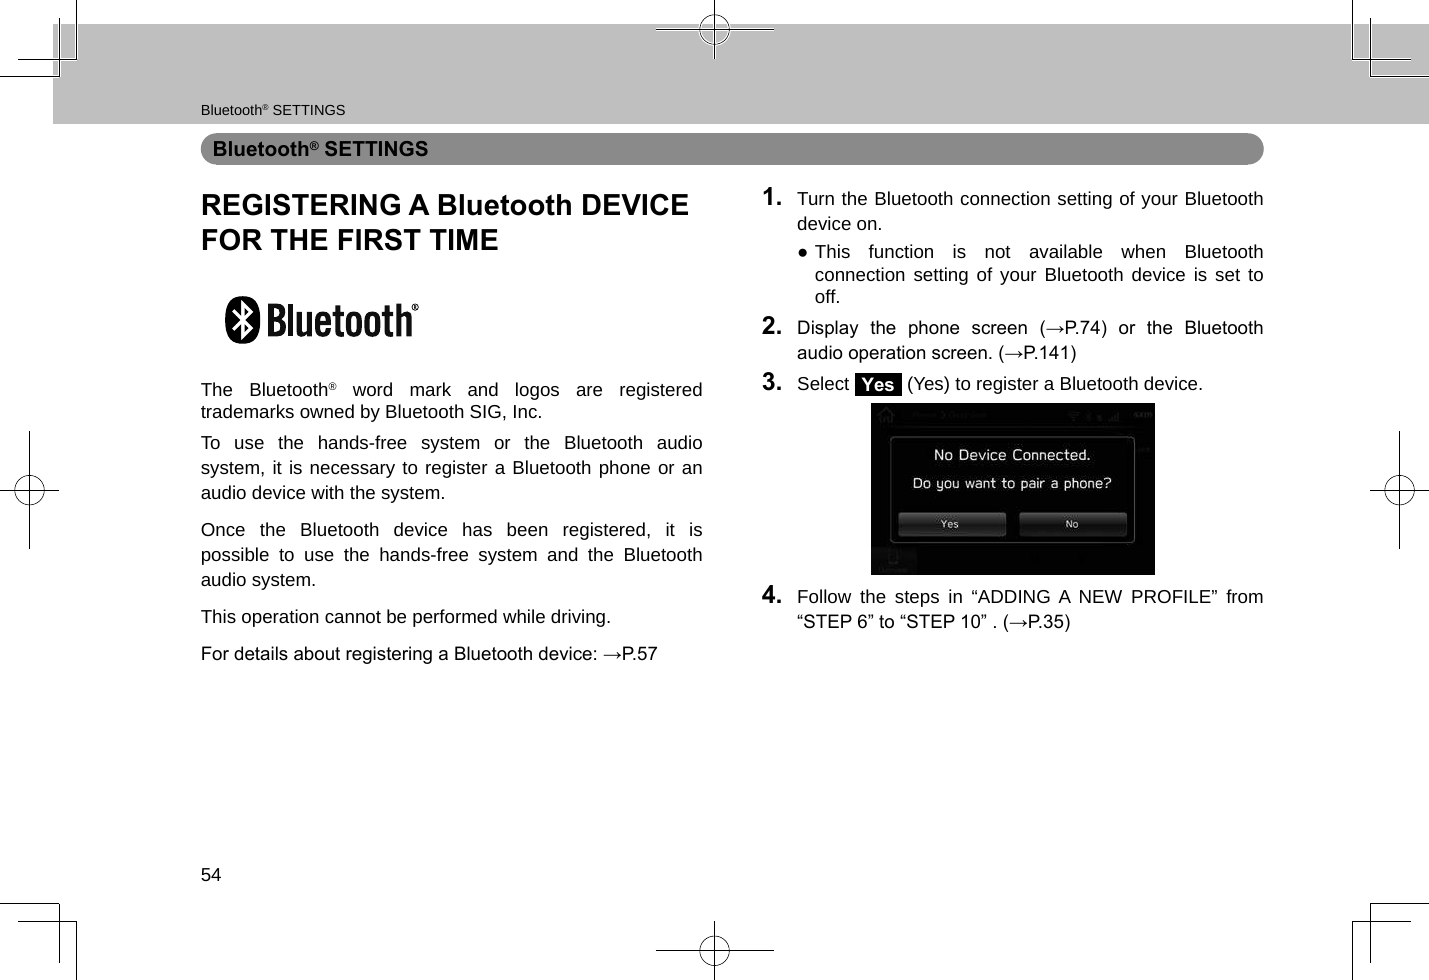 Bluetooth® SETTINGS54Bluetooth® SETTINGSREGISTERING A Bluetooth DEVICE FOR THE FIRST TIMEThe Bluetooth® word mark and logos are registered trademarks owned by Bluetooth SIG, Inc.To use the hands-free system or the Bluetooth audio system, it is necessary to register a Bluetooth phone or an audio device with the system.Once the Bluetooth device has been registered, it is possible to use the hands-free system and the Bluetooth audio system.This operation cannot be performed while driving.For details about registering a Bluetooth device: →P.571.  Turn the Bluetooth connection setting of your Bluetooth device on. ●This function is not available when Bluetooth connection setting of your Bluetooth device is set to off.2.  Display  the  phone  screen  (→P.74)  or  the  Bluetooth audio operation screen. (→P.141)3.  Select Yes (Yes) to register a Bluetooth device.4.  Follow the steps in “ADDING A NEW PROFILE” from “STEP 6” to “STEP 10” . (→P.35)